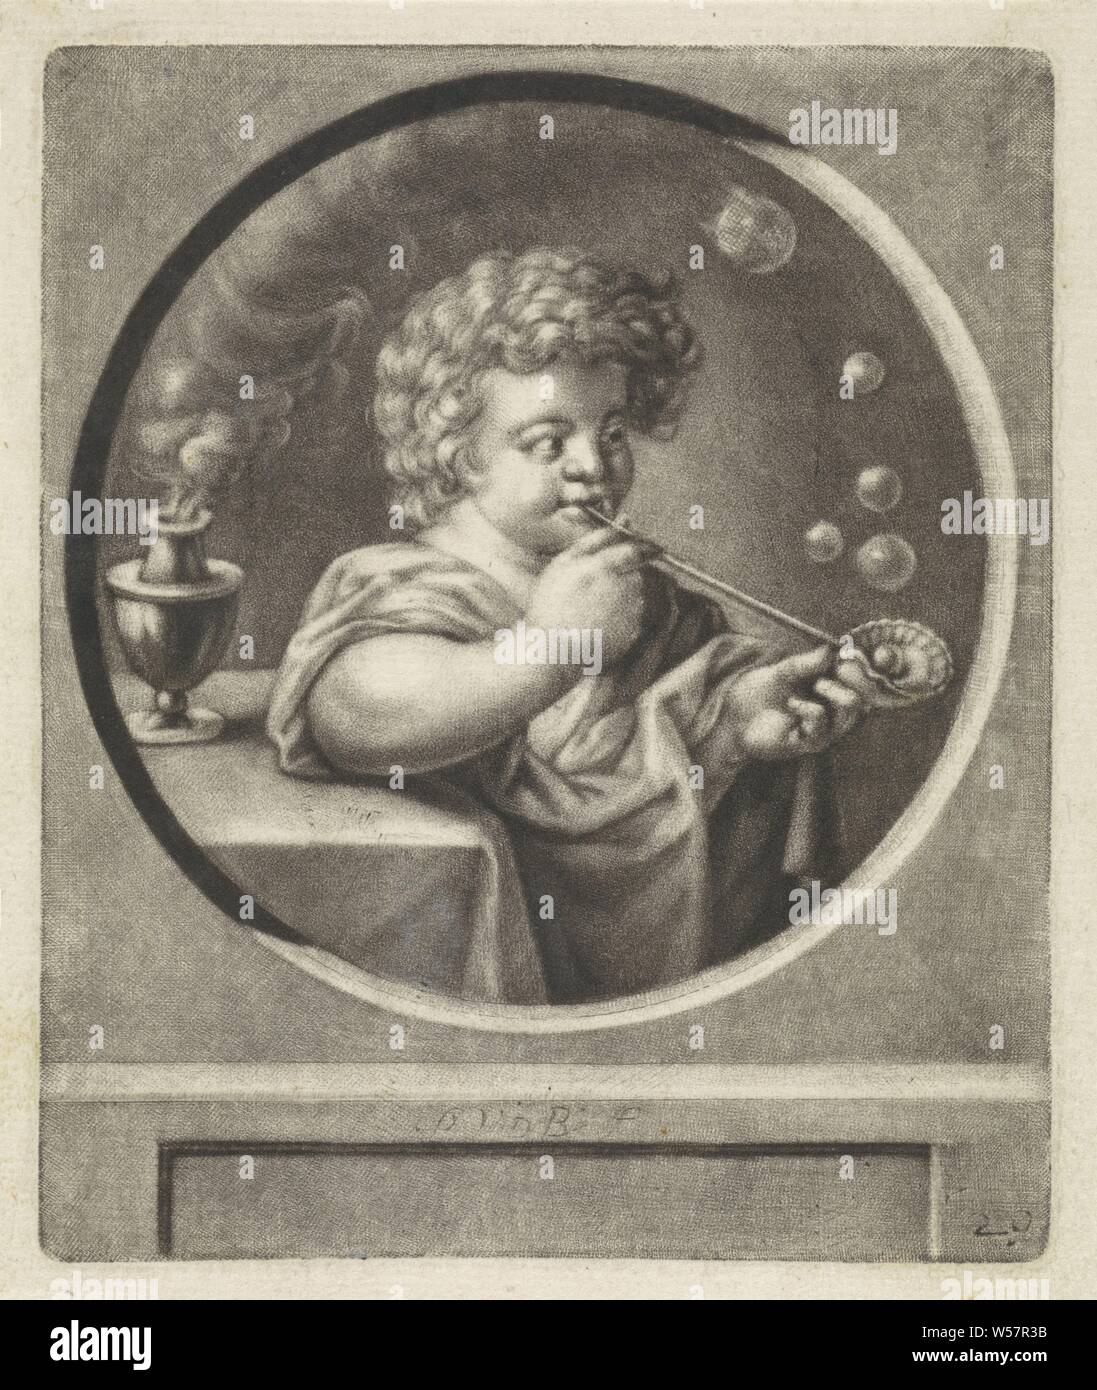 Bubble-blowing child, bubble-blowing (children's games and plays), Pieter van den Berge (mentioned on object), 1686 - 1737, paper, h 126 mm × w 105 mm Stock Photo